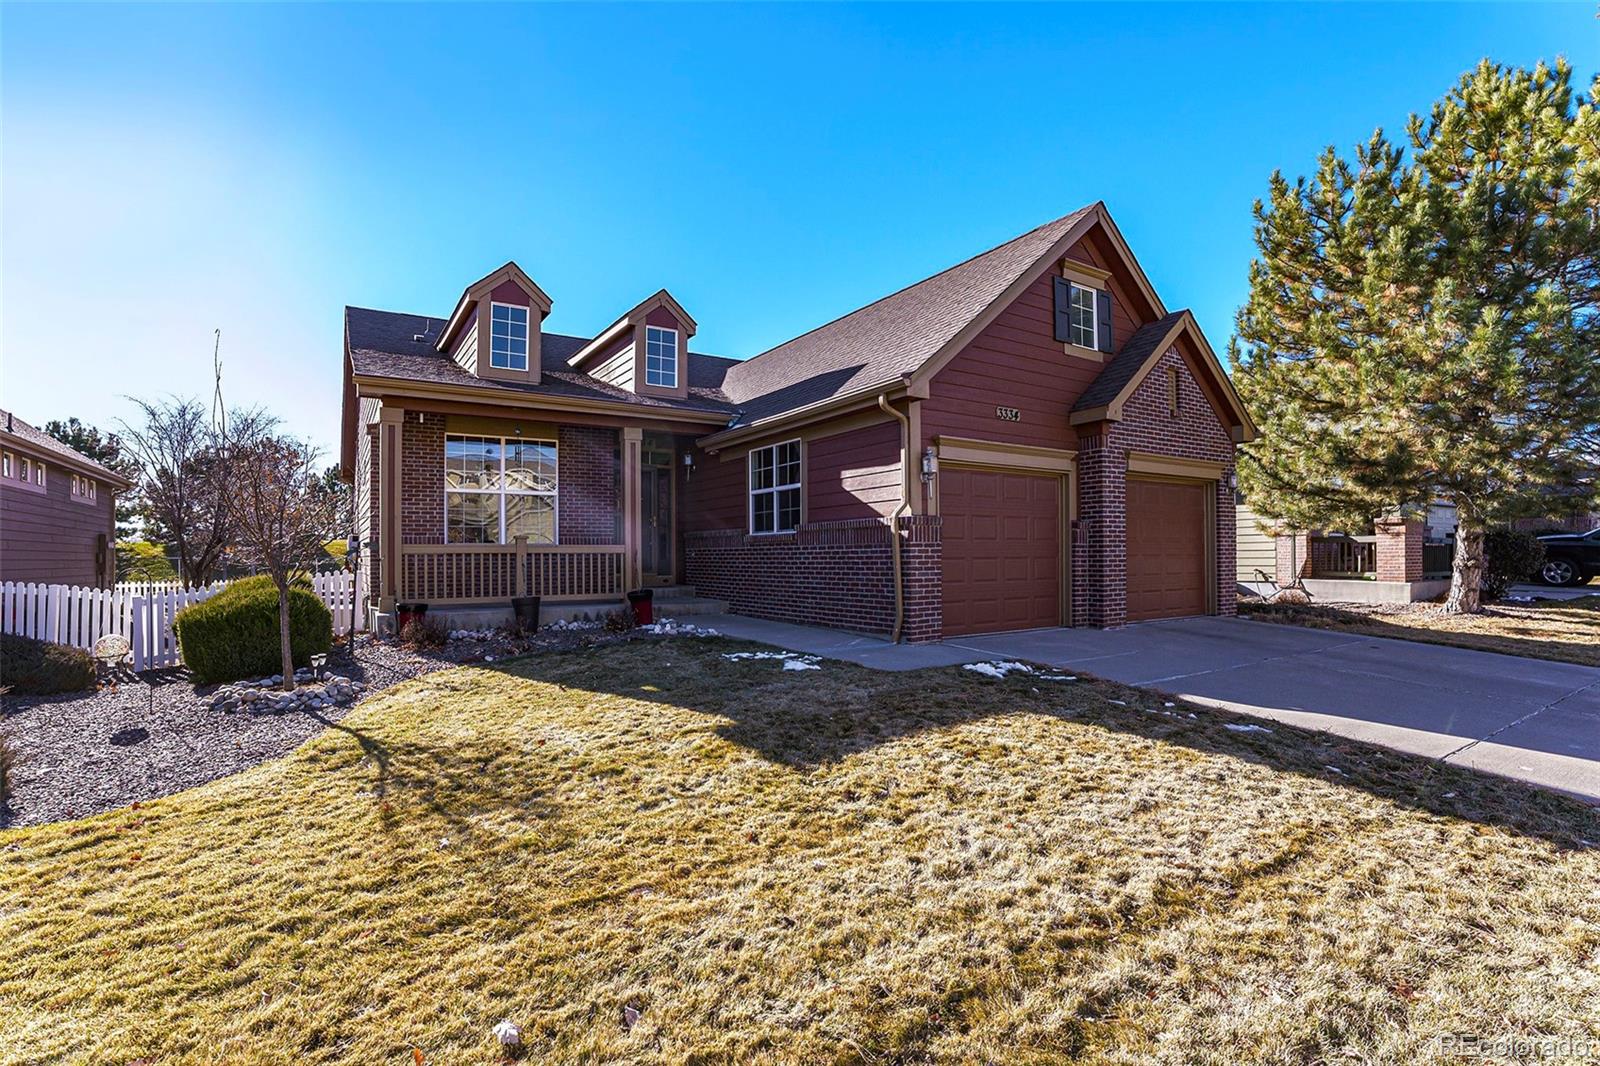 3334 W 126th Place, broomfield MLS: 6069447 Beds: 2 Baths: 2 Price: $560,000